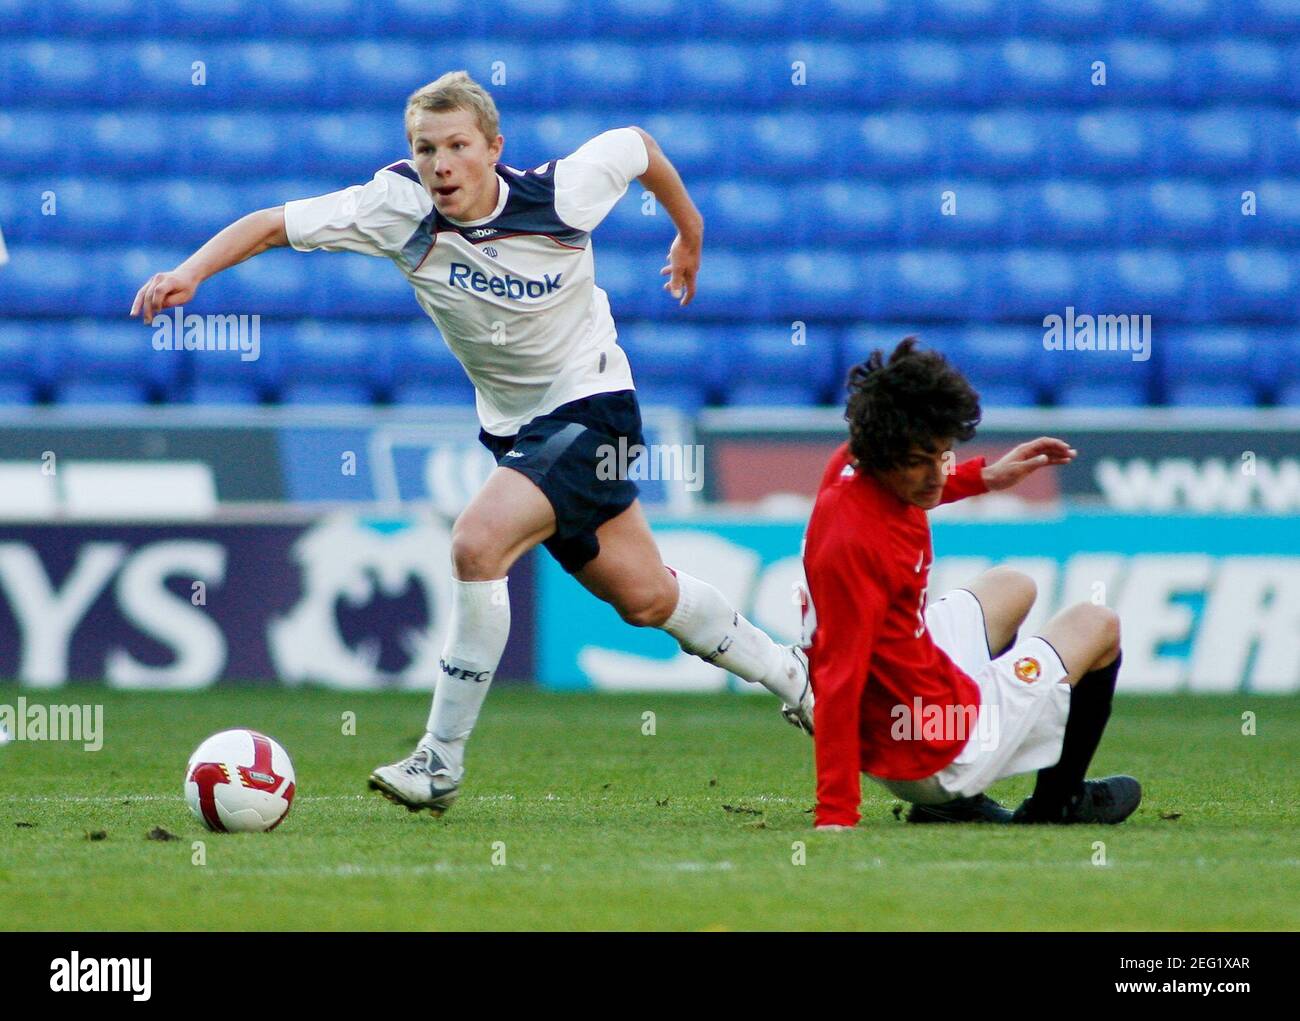 Football - Bolton Wanderers v Manchester United - Manchester Senior Cup  Final - The Reebok Stadium - 08/09 - 12/5/09 Bolton Wanderers' Aaron Mooy  (L) in action Mandatory Credit: Action Images / Craig Brough Stock Photo -  Alamy